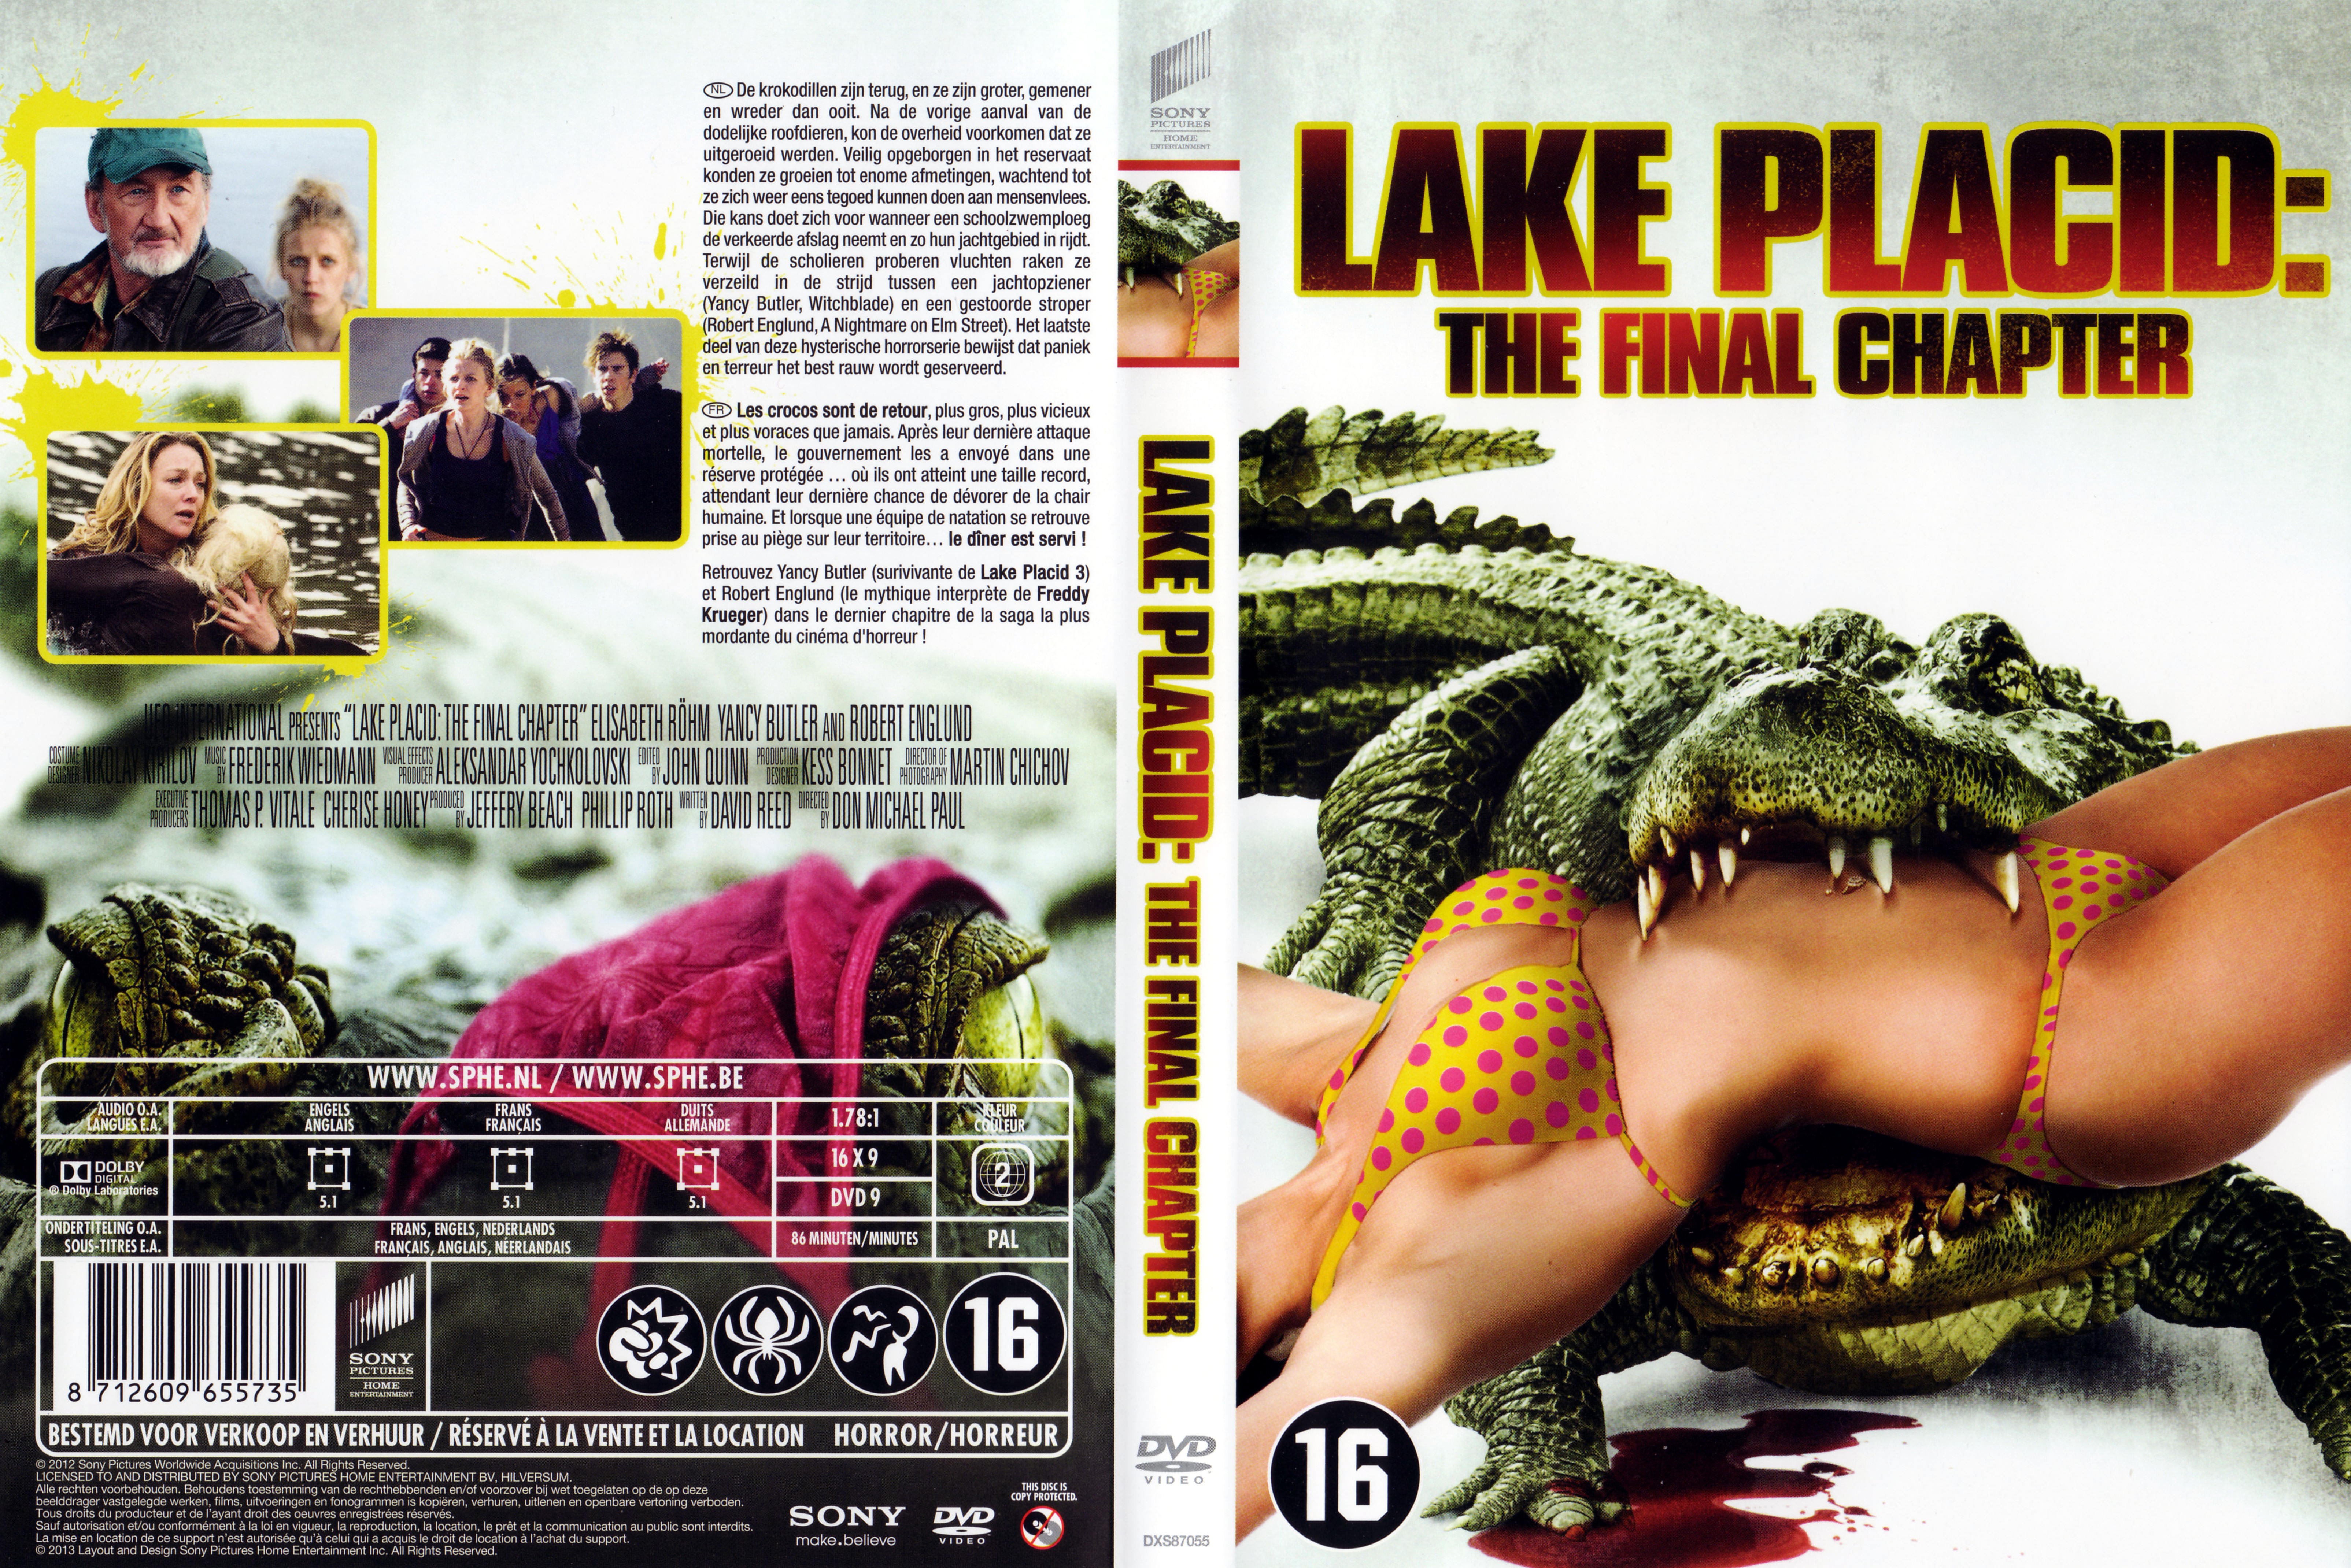 Jaquette DVD Lake Placid - The final chapter